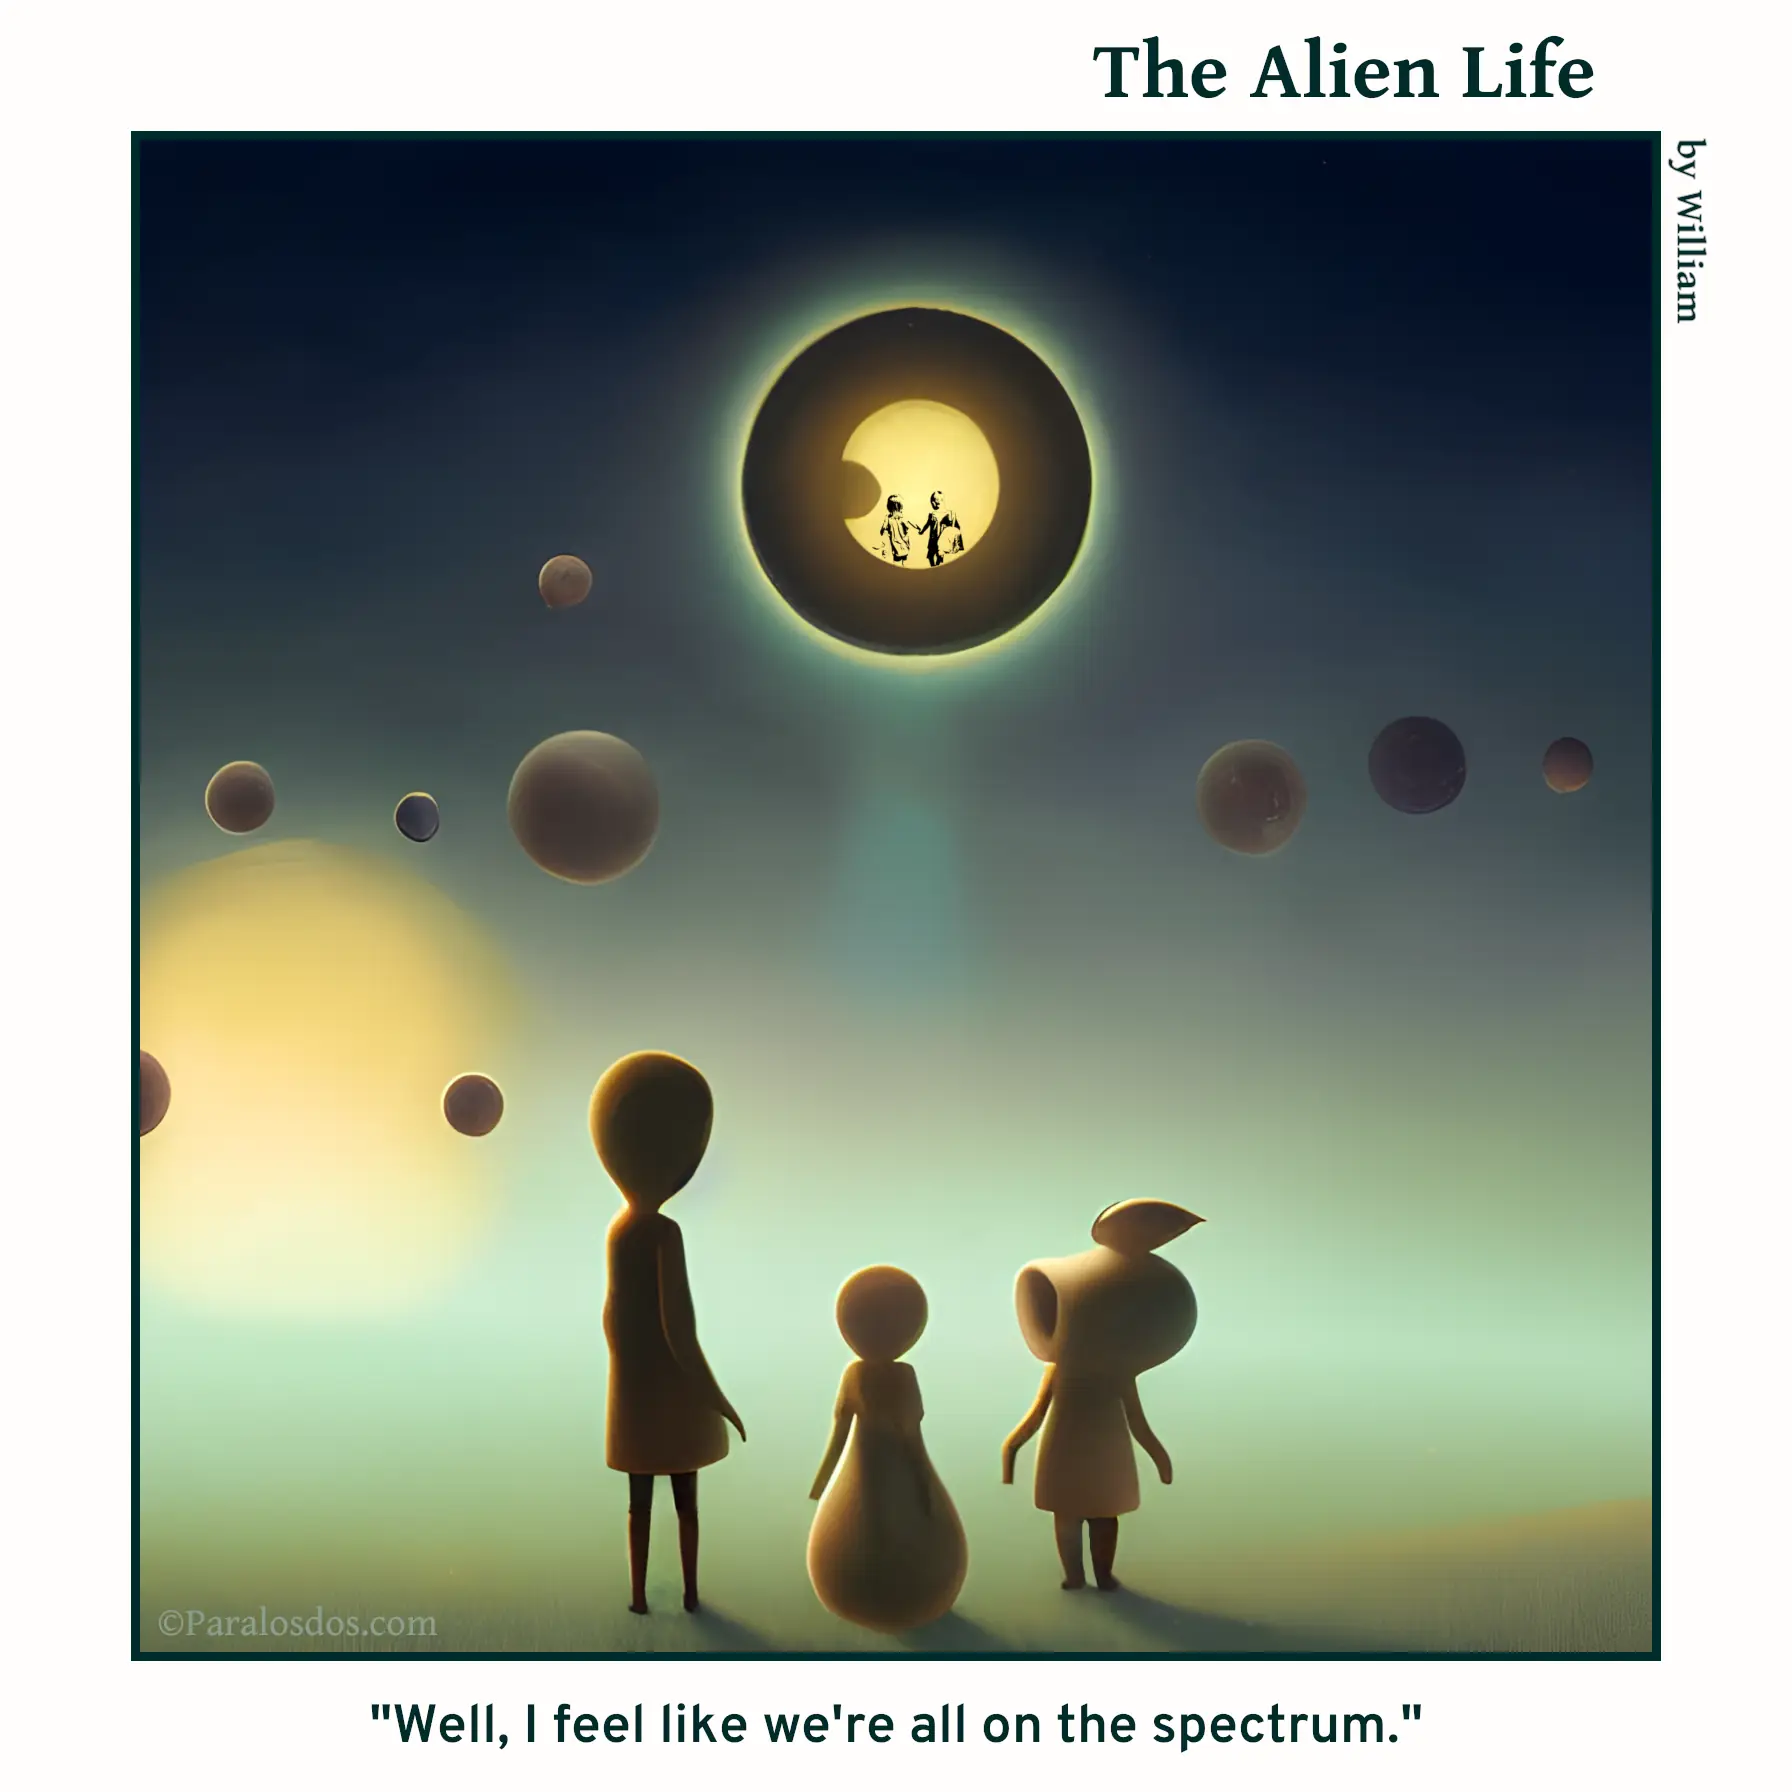 The Alien Life, one panel Comic. Three completely different aliens are standing together. The sky is full of moons, or planets. The caption reads: "Well, I feel like we're all on the spectrum."